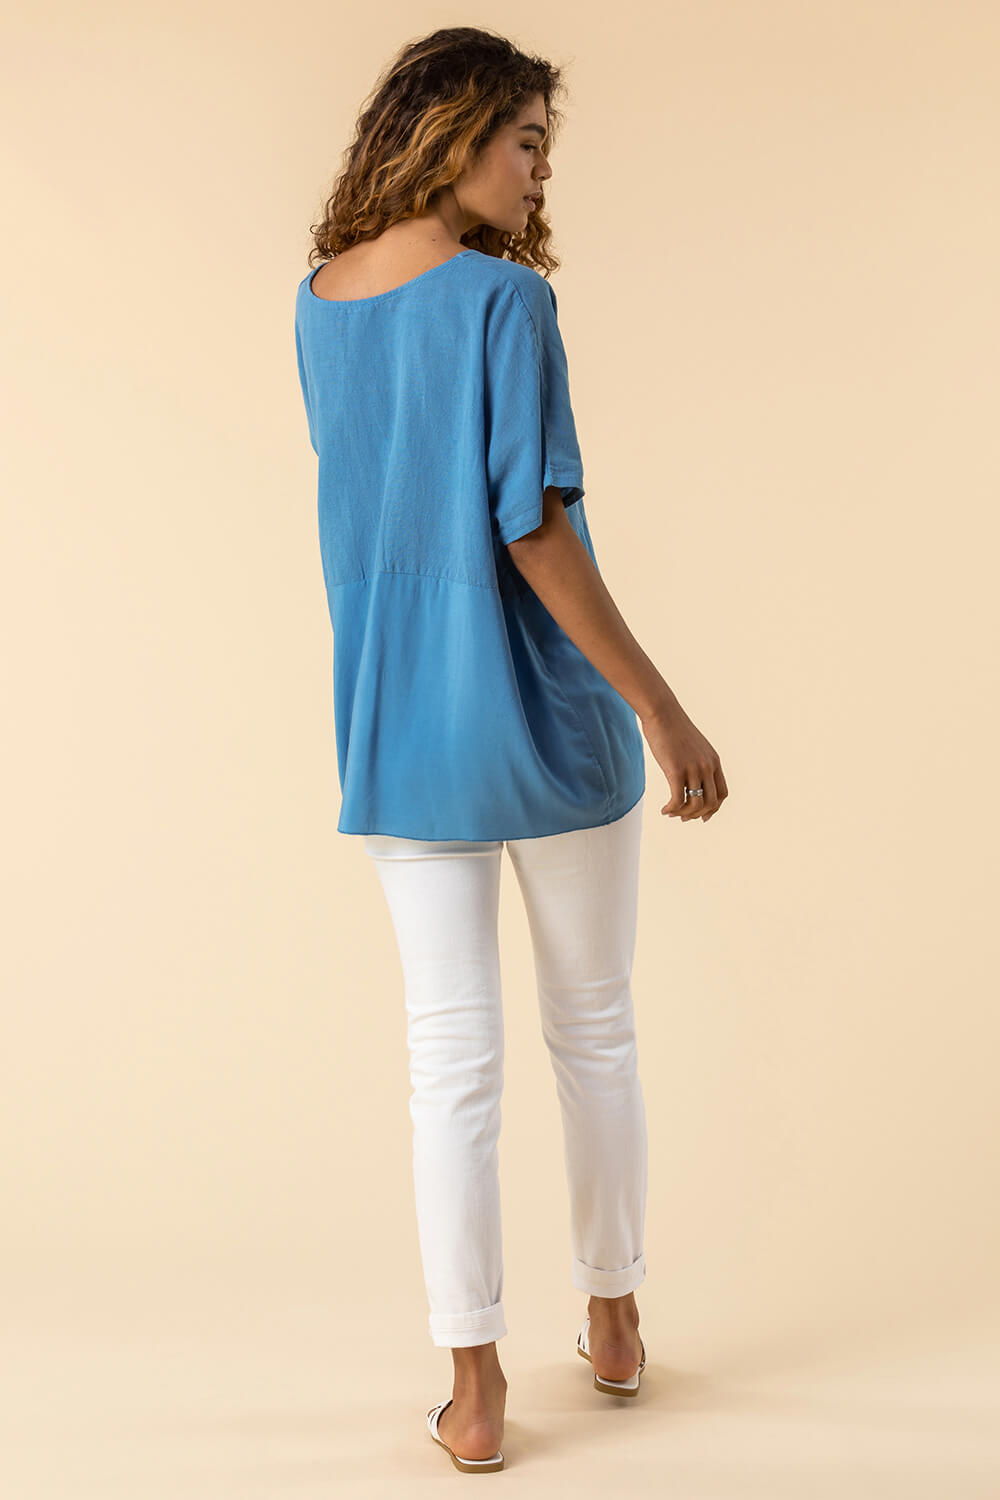 Blue Slouchy Feather Print Top, Image 2 of 4